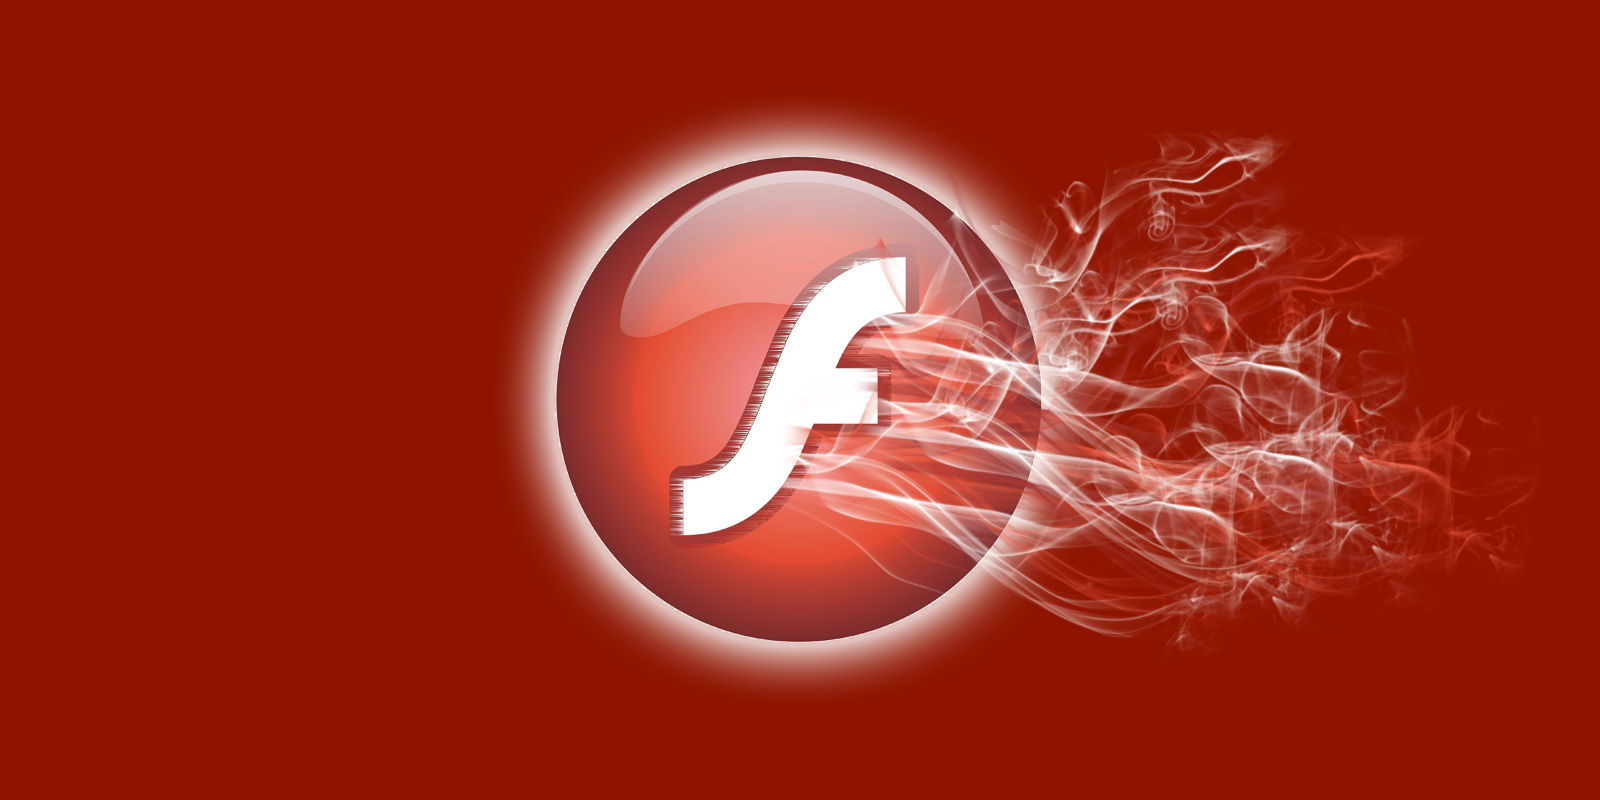 Adobe releases final Flash Player update, warns of 2021 kill switch